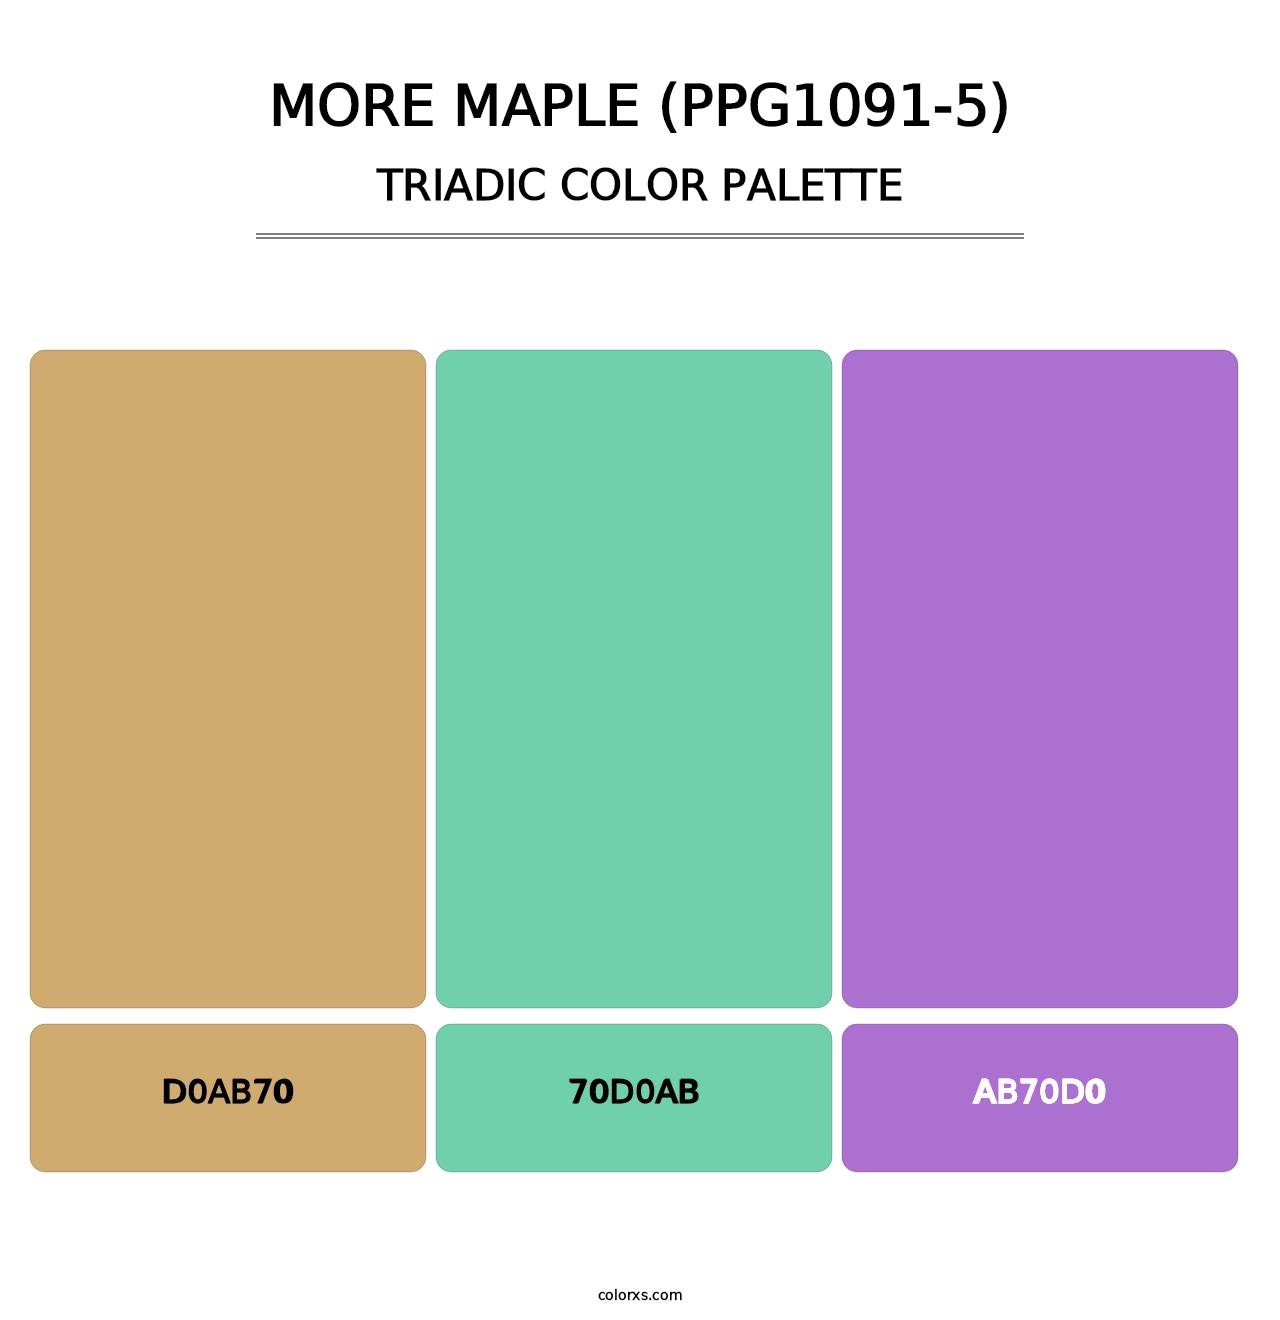 More Maple (PPG1091-5) - Triadic Color Palette